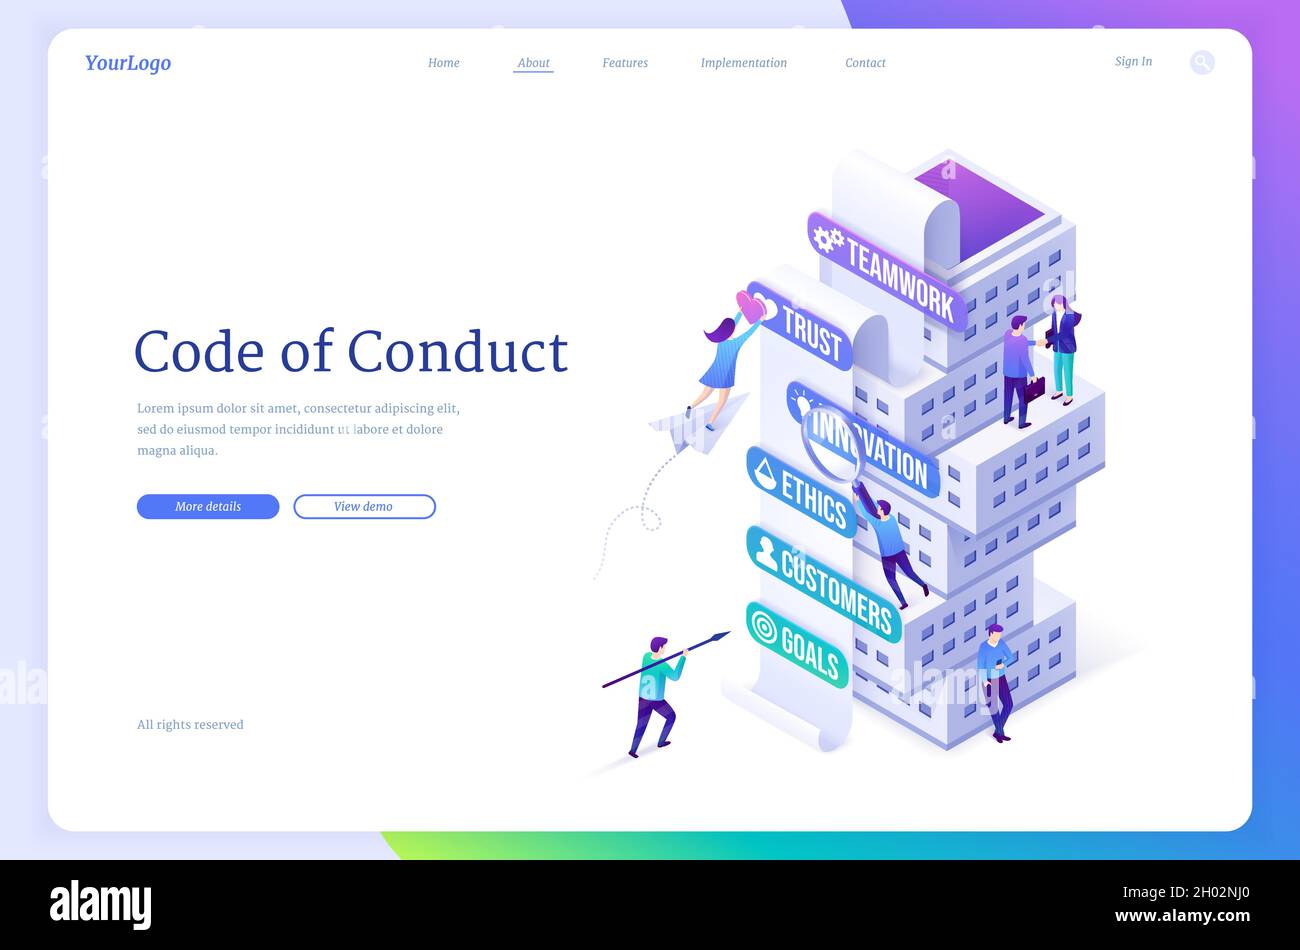 Code of conduct isometric landing page, company business rules concept with tiny office people at tower of core values teamwork, trust, innovation, ethics, customers and goals, 3d Vector web banner Stock Vector